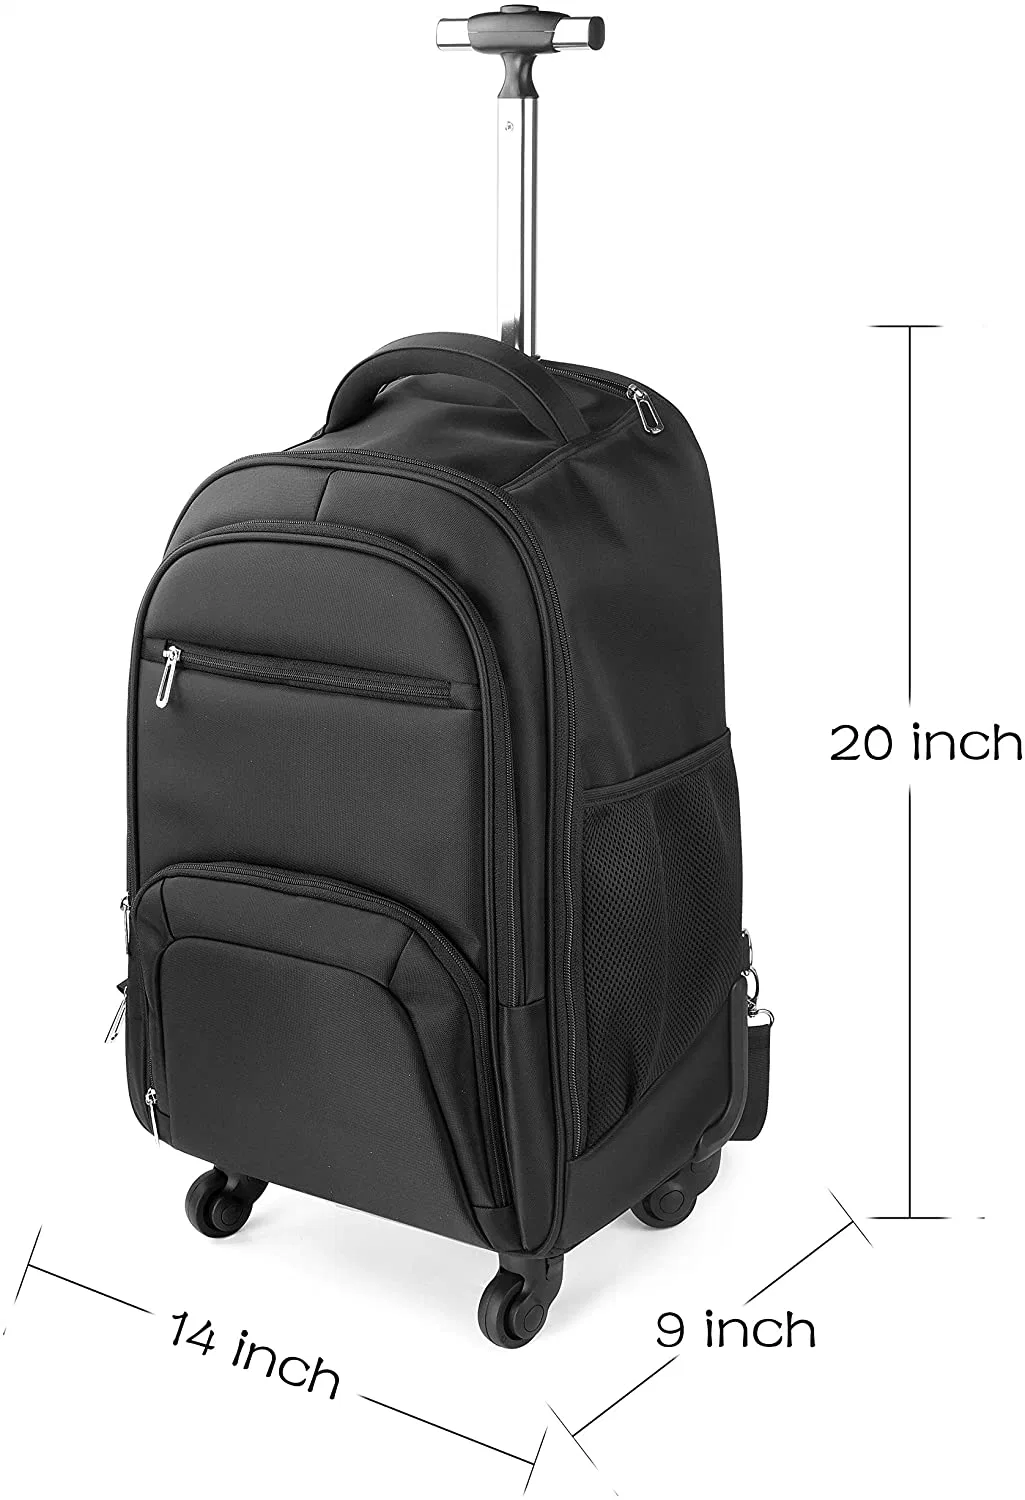 Carry-on Trolley Luggage Business Backpack Bag with 4 Wheels